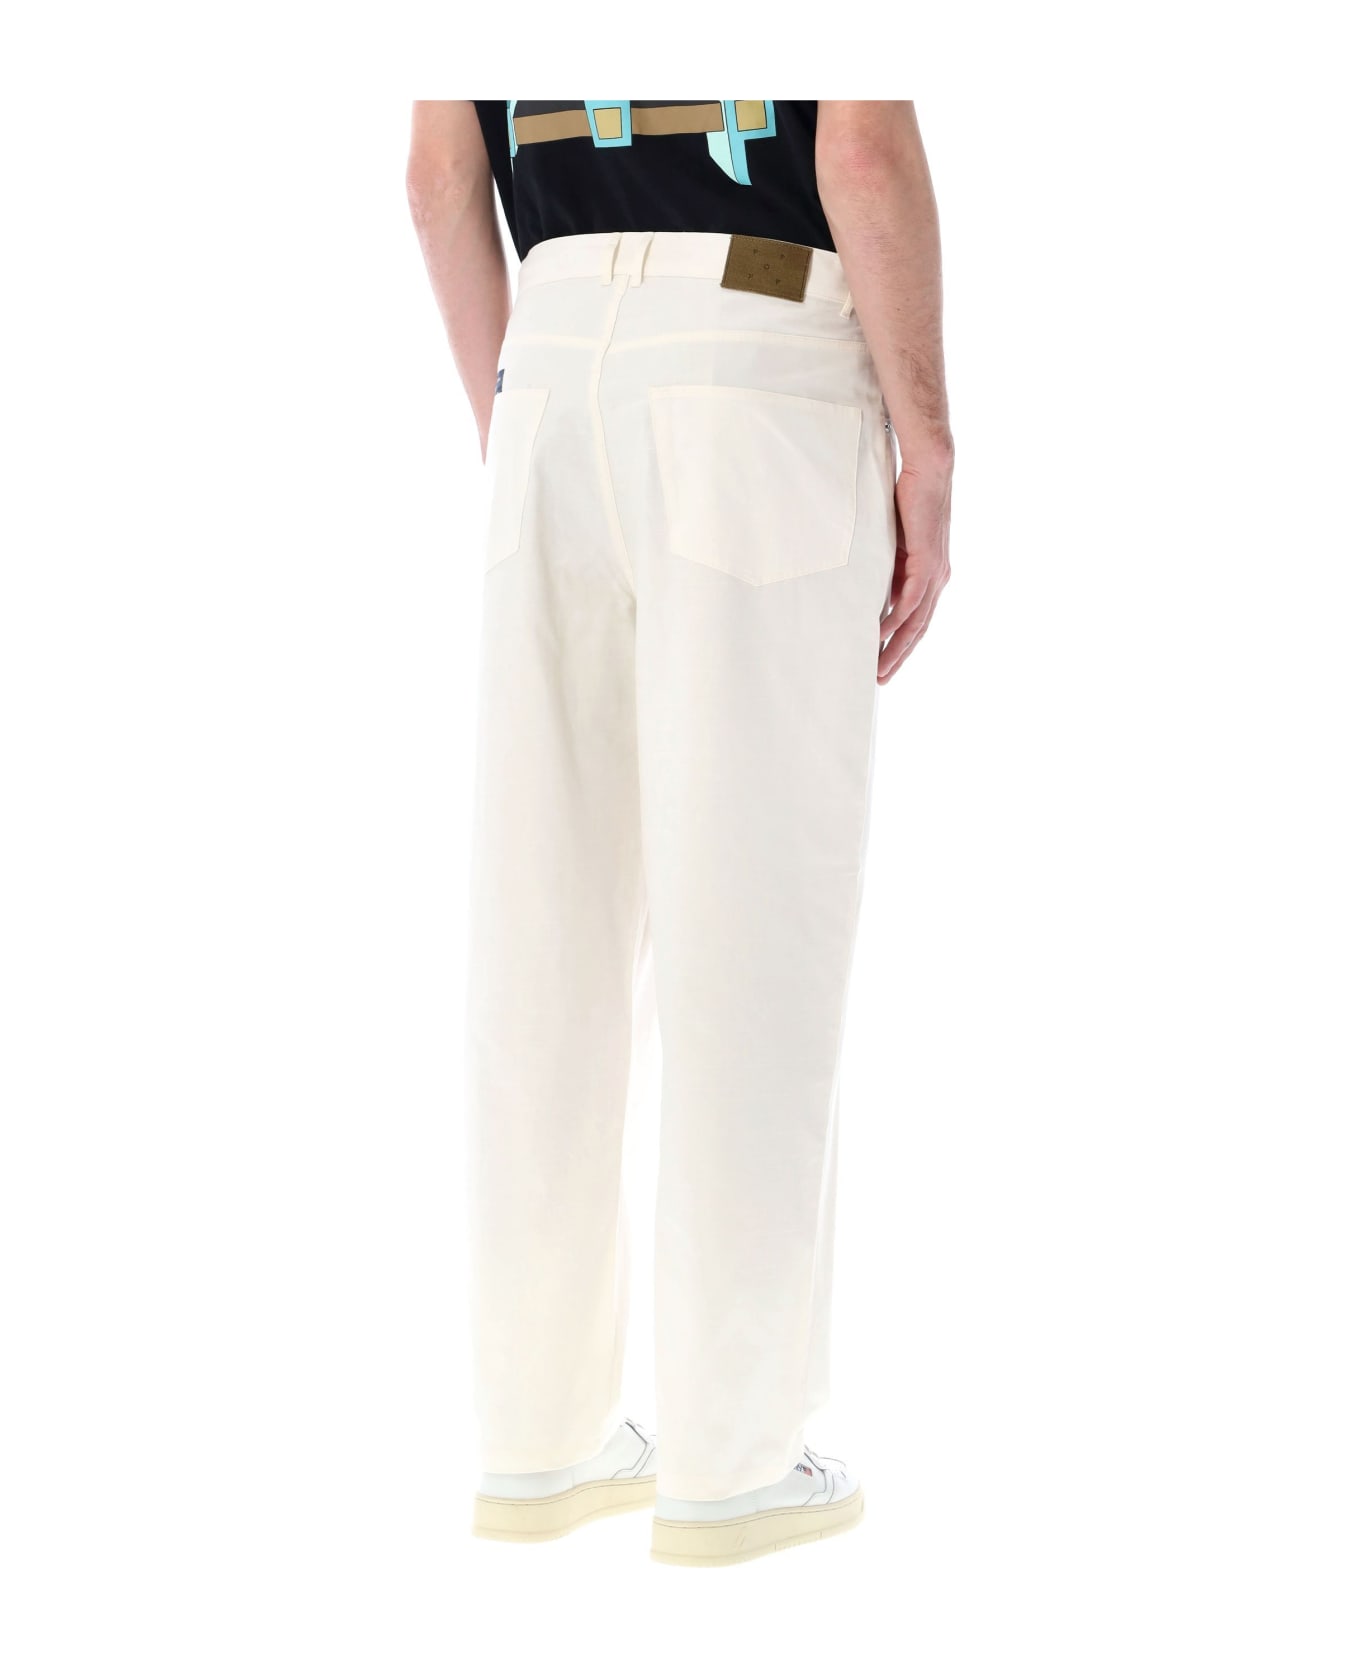 Pop Trading Company Drs Pants - OFFWHITE